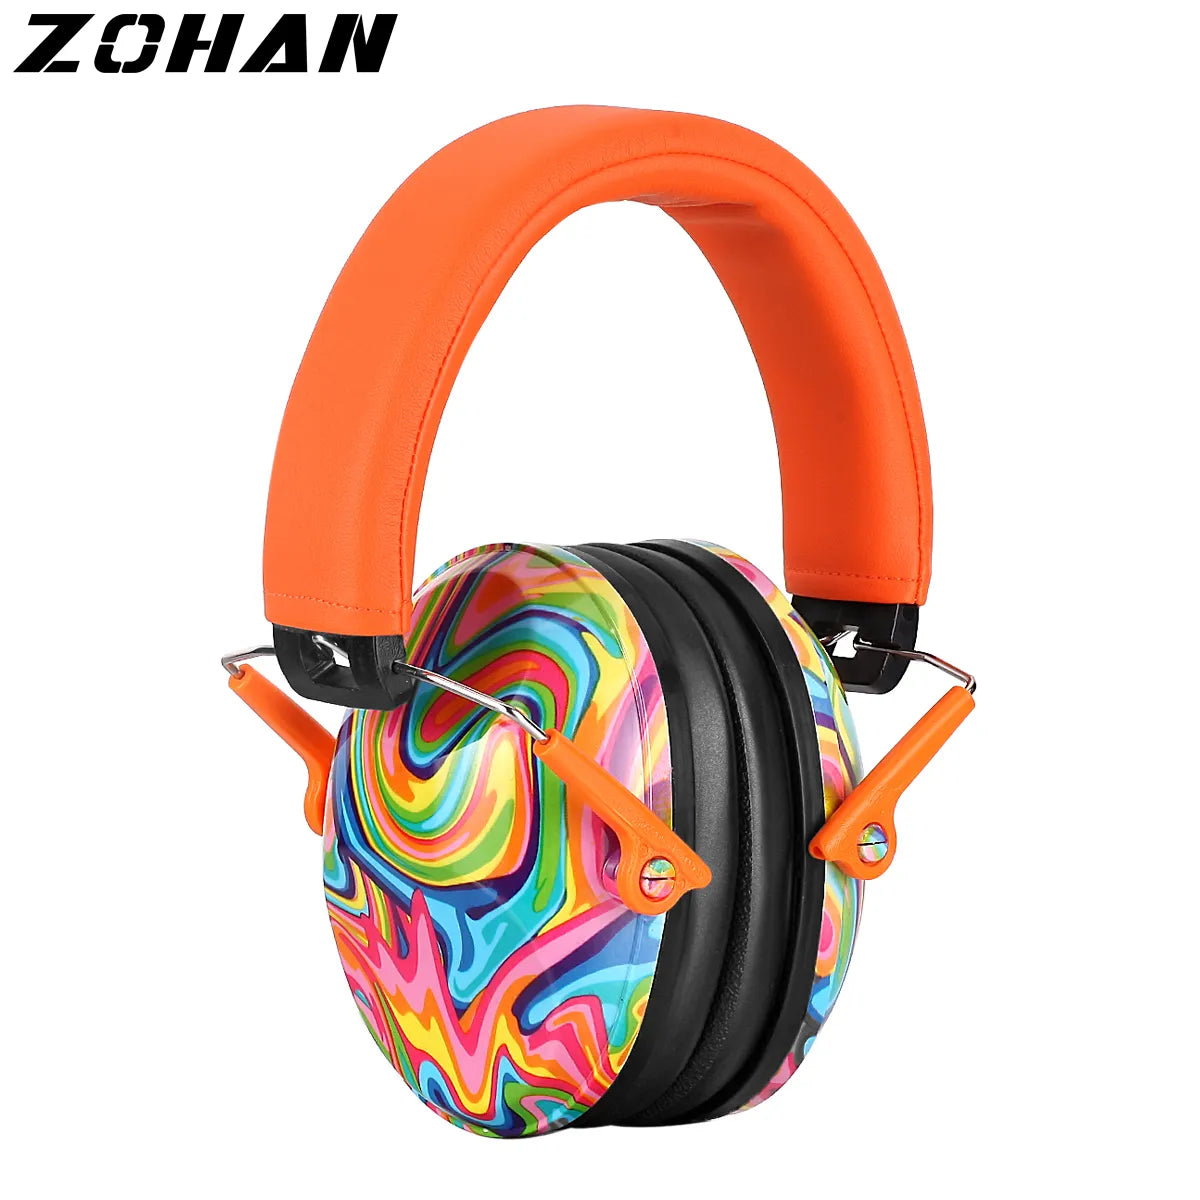 ZOHAN Kid Ear Protection Baby Noise Earmuffs Noise Reduction Ear Defenders earmuff for children Adjustable nrr 25db Safety